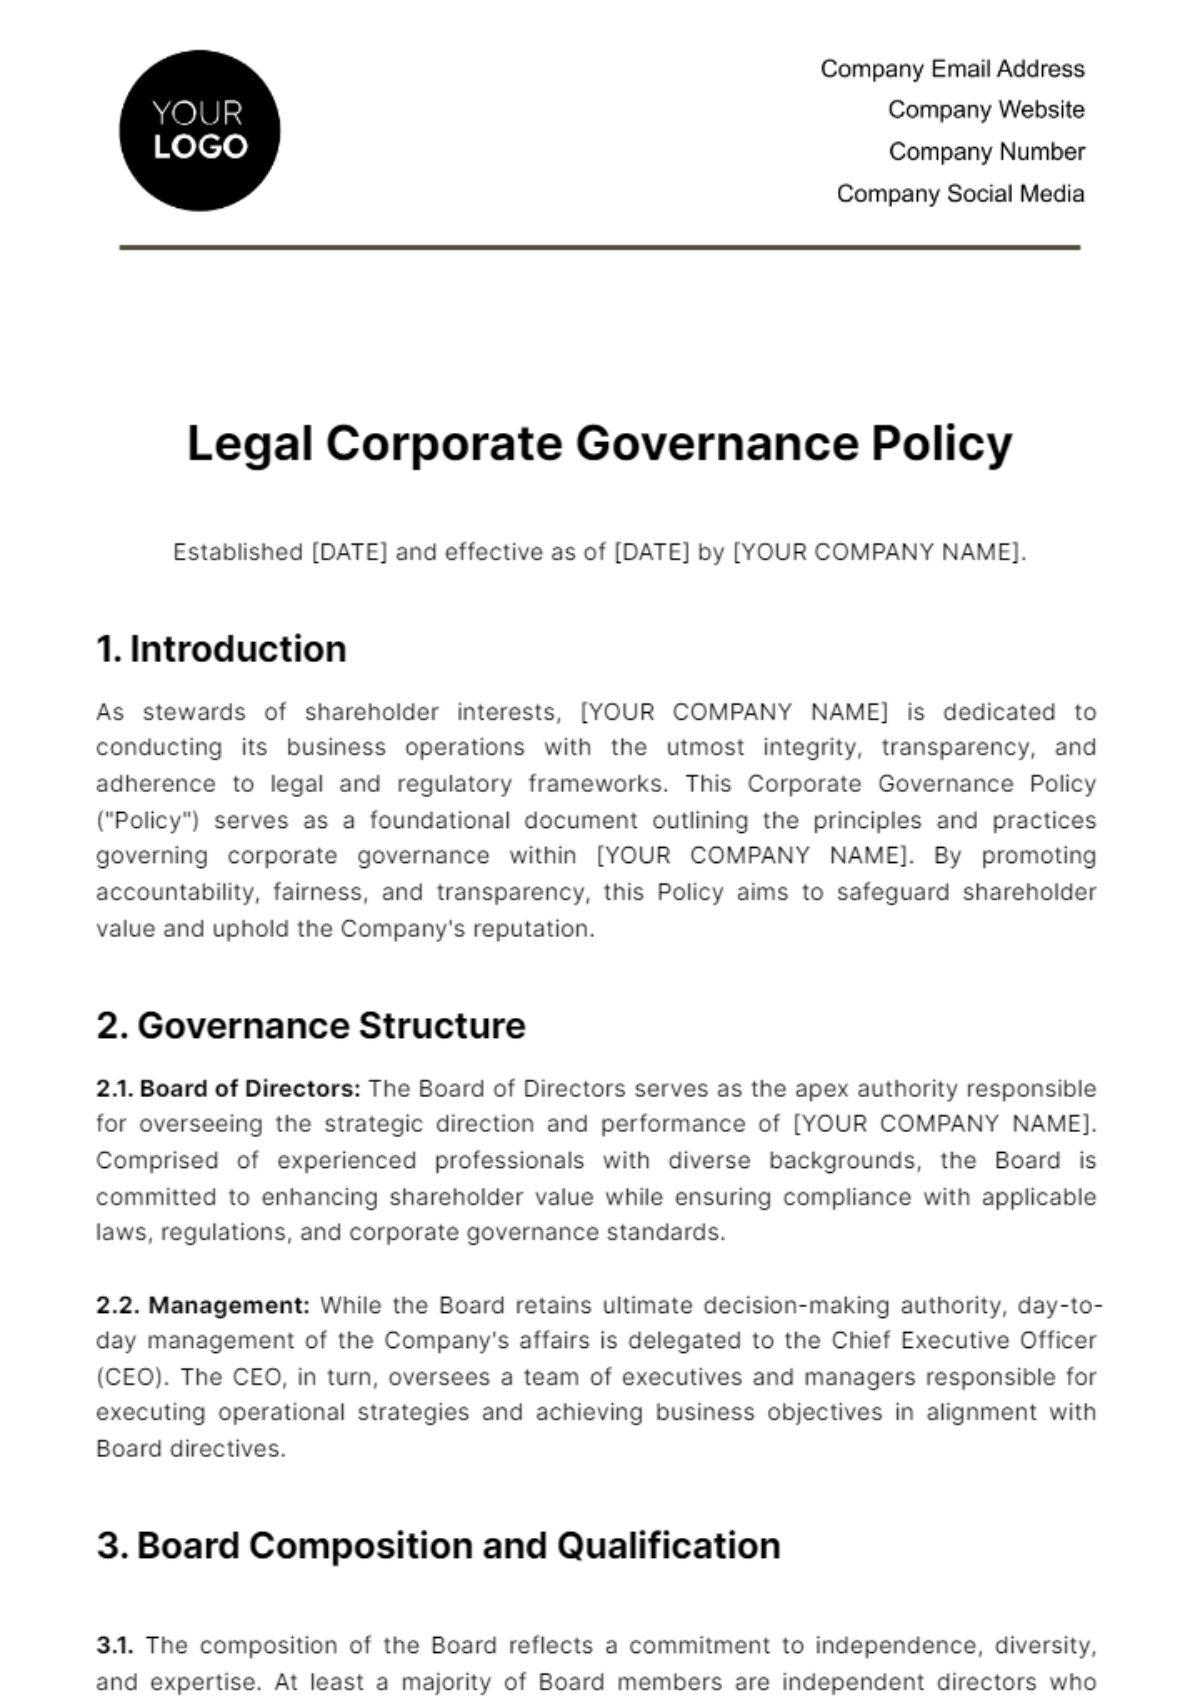 Legal Corporate Corporate Governance Policy Template